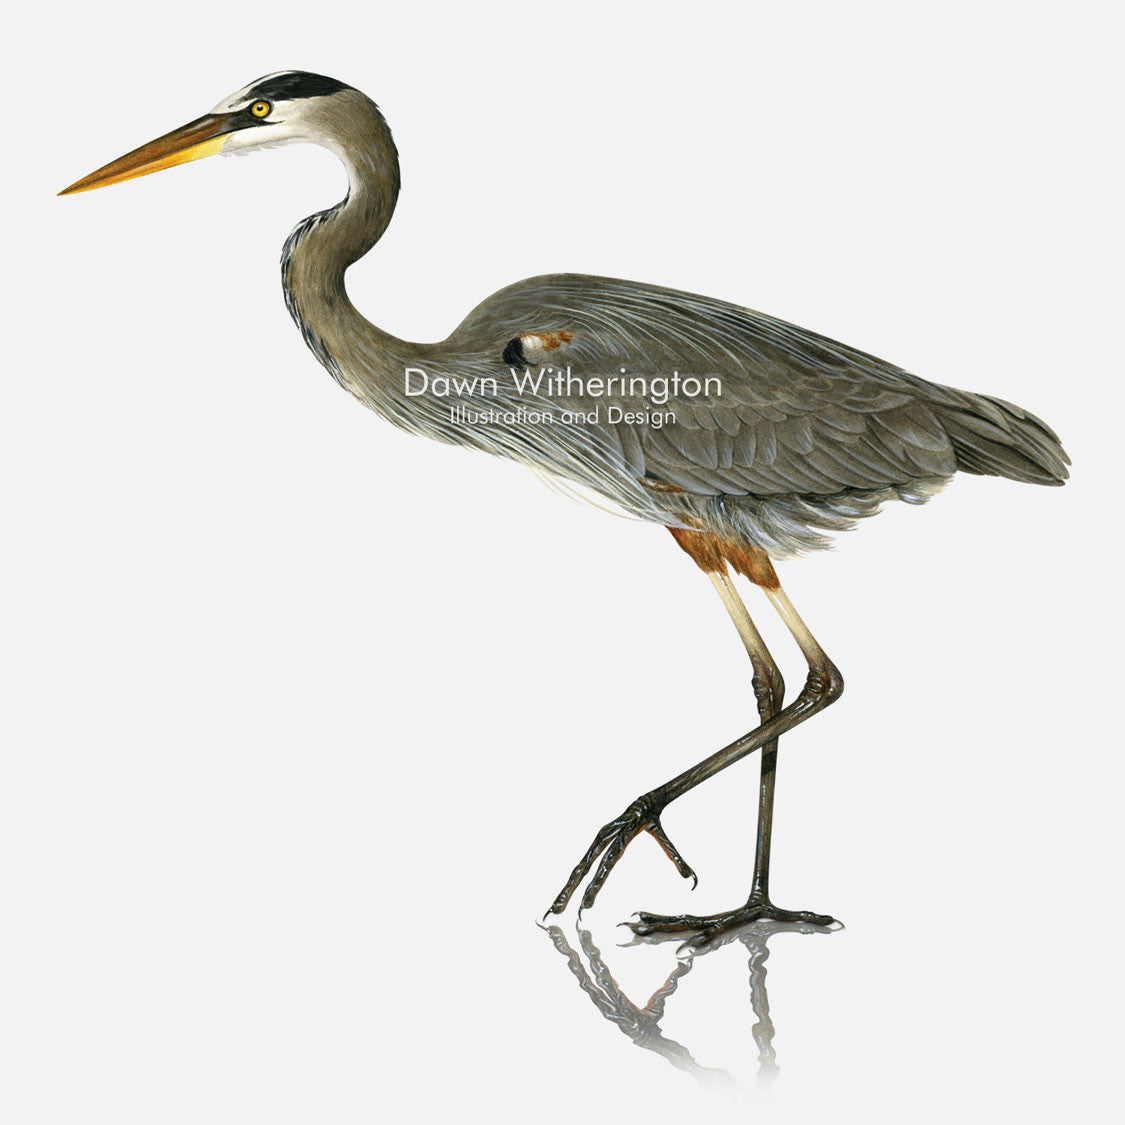 This beautiful illustration of a great blue heron, Ardea herodias, is biologically accurate in detail.